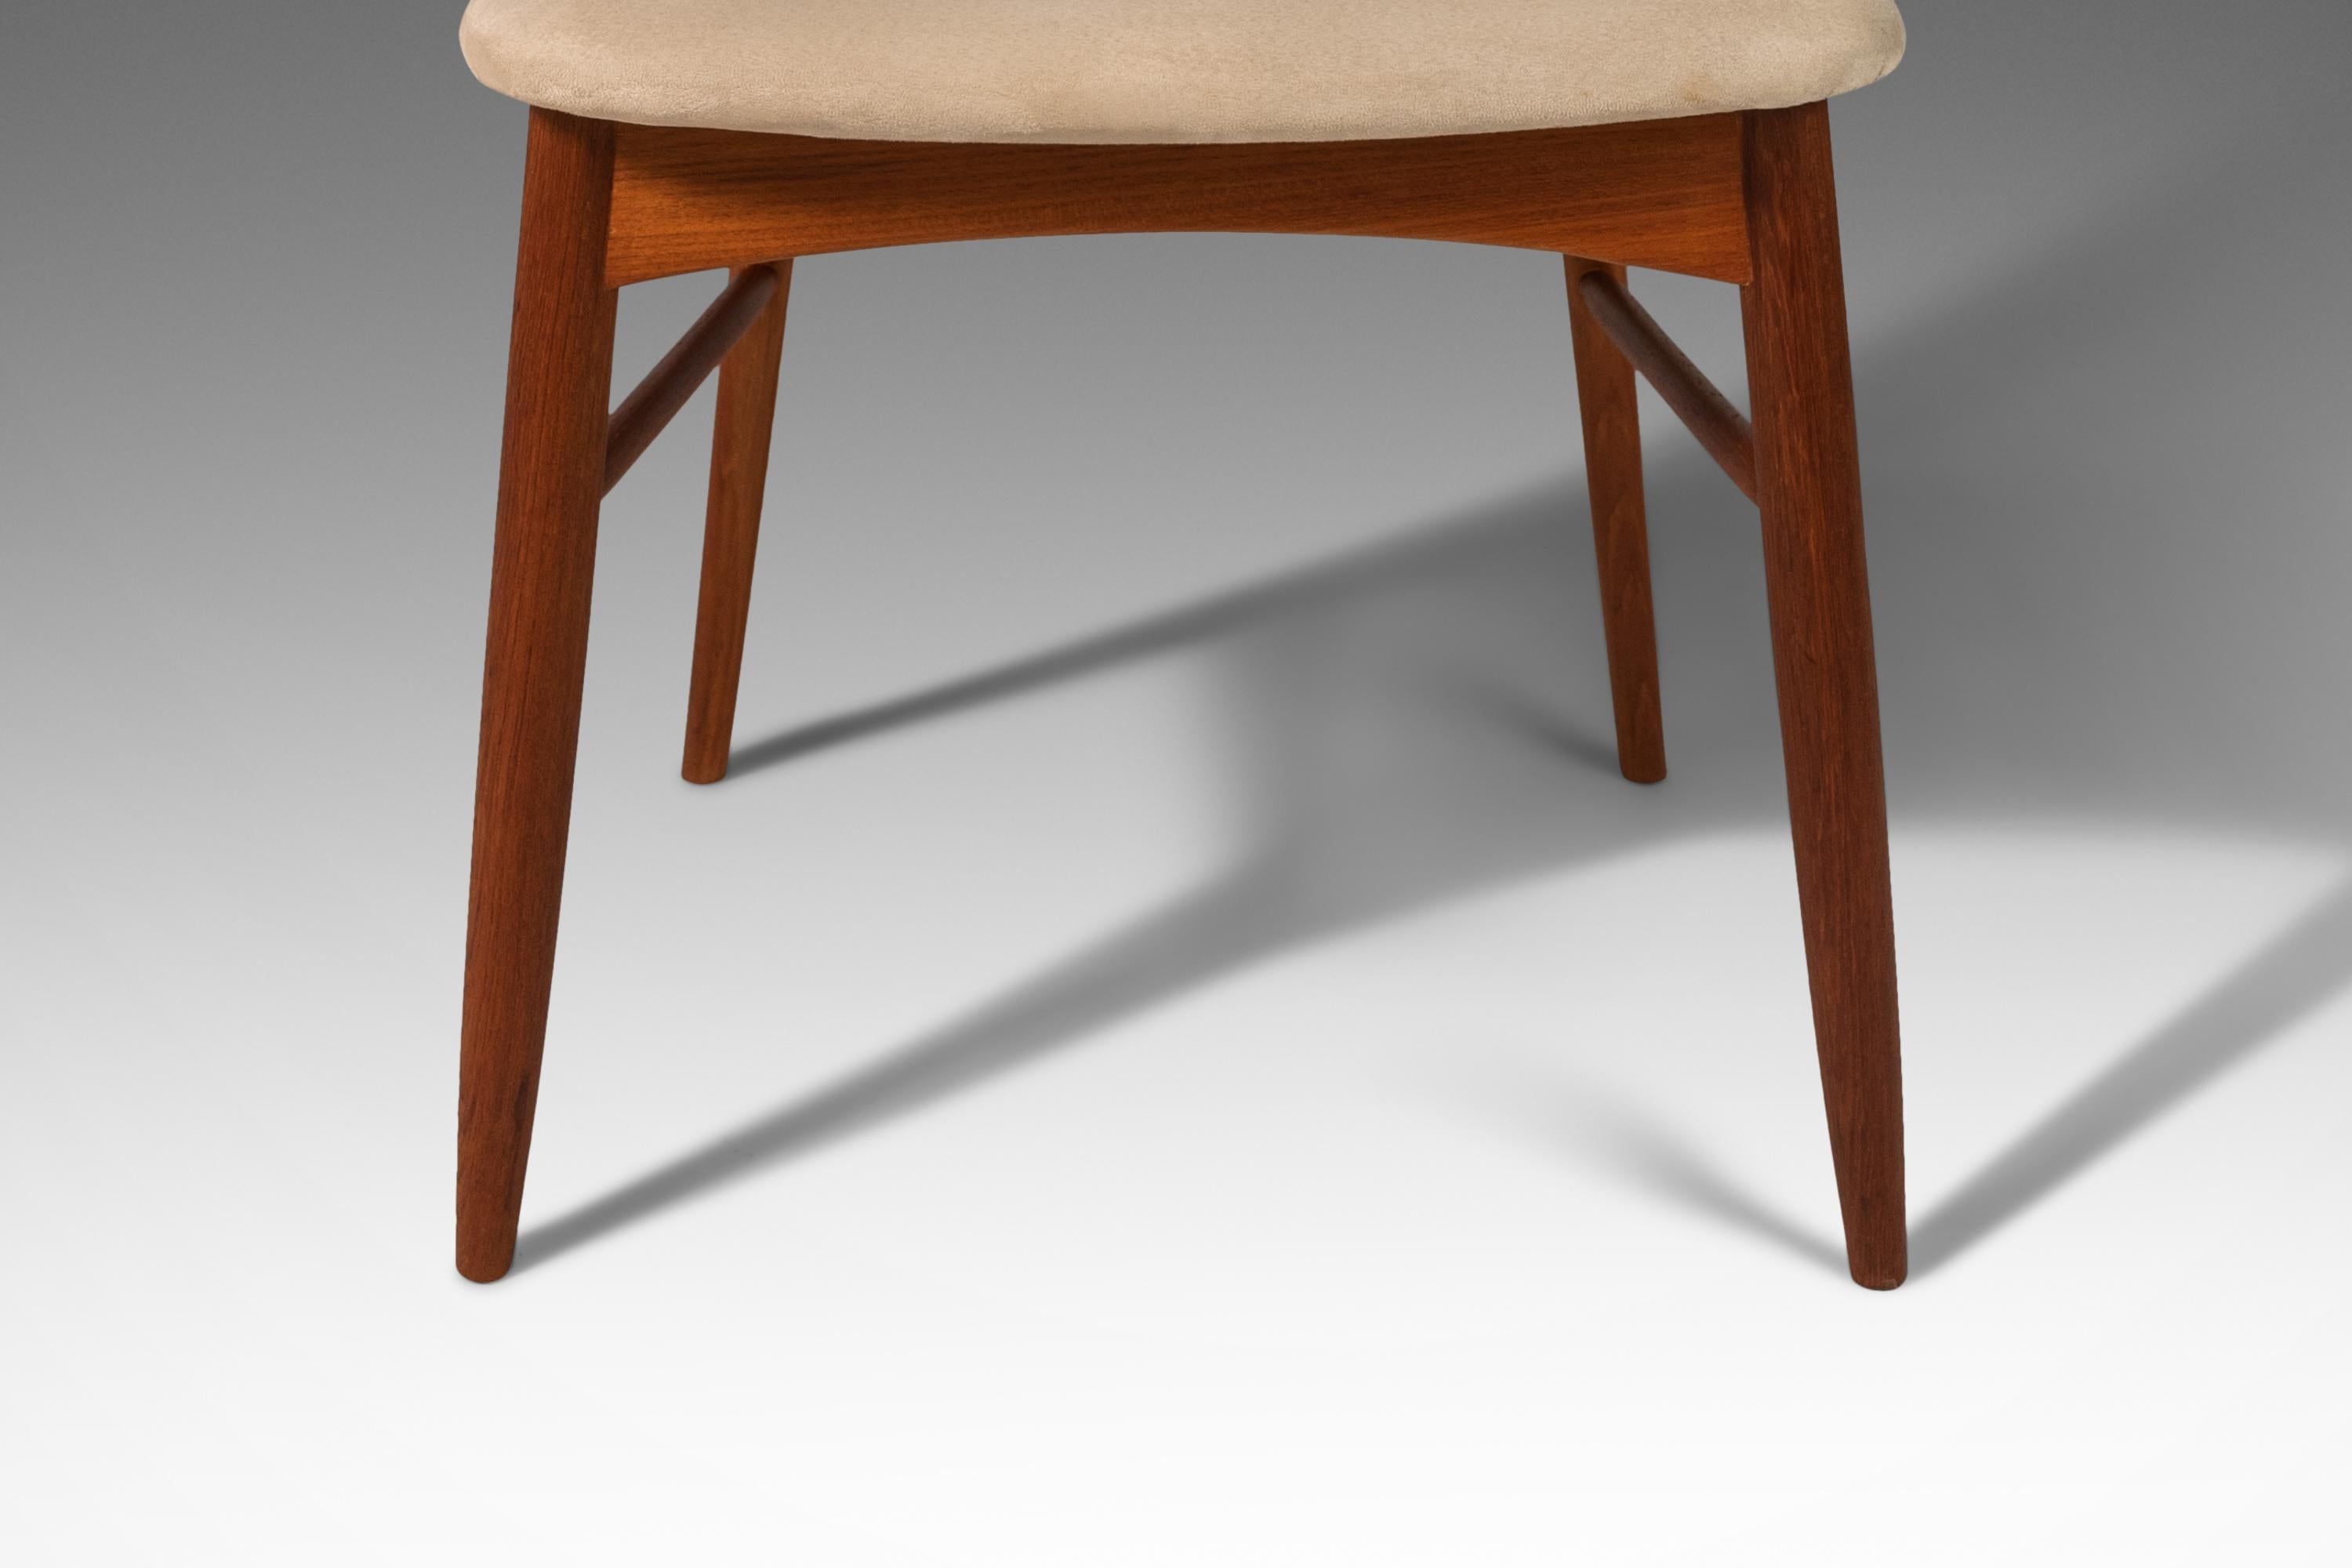 Set of Six (6) Teak Eva Dining Chairs by Niels Koefoed for Koefoeds Hornslet 60s For Sale 9